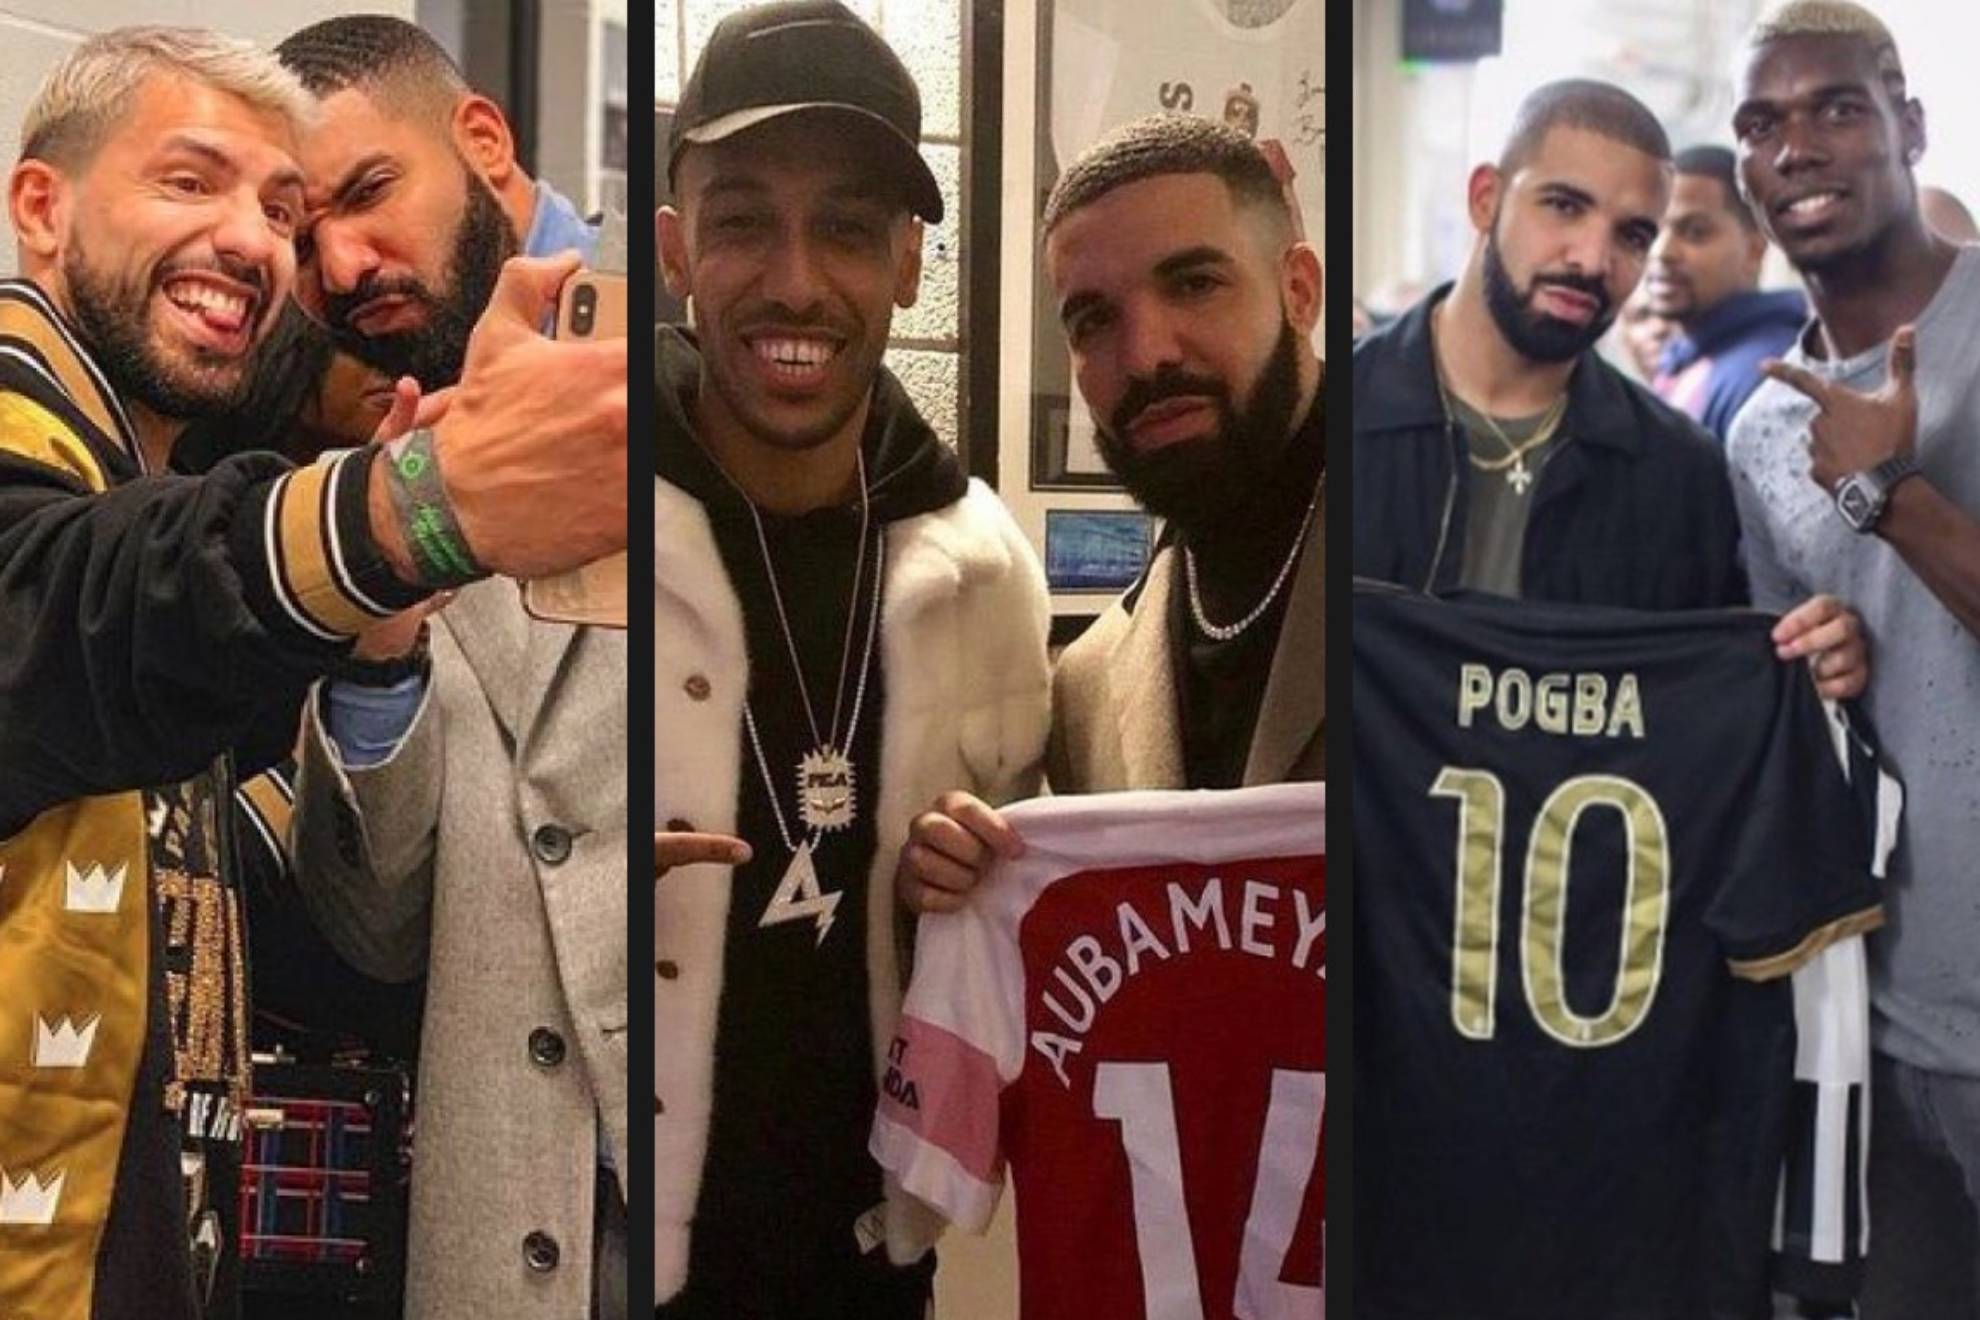 Barcelona: The Drake curse: Will Barcelona play Real Madrid with a curse on their jersey? | Marca